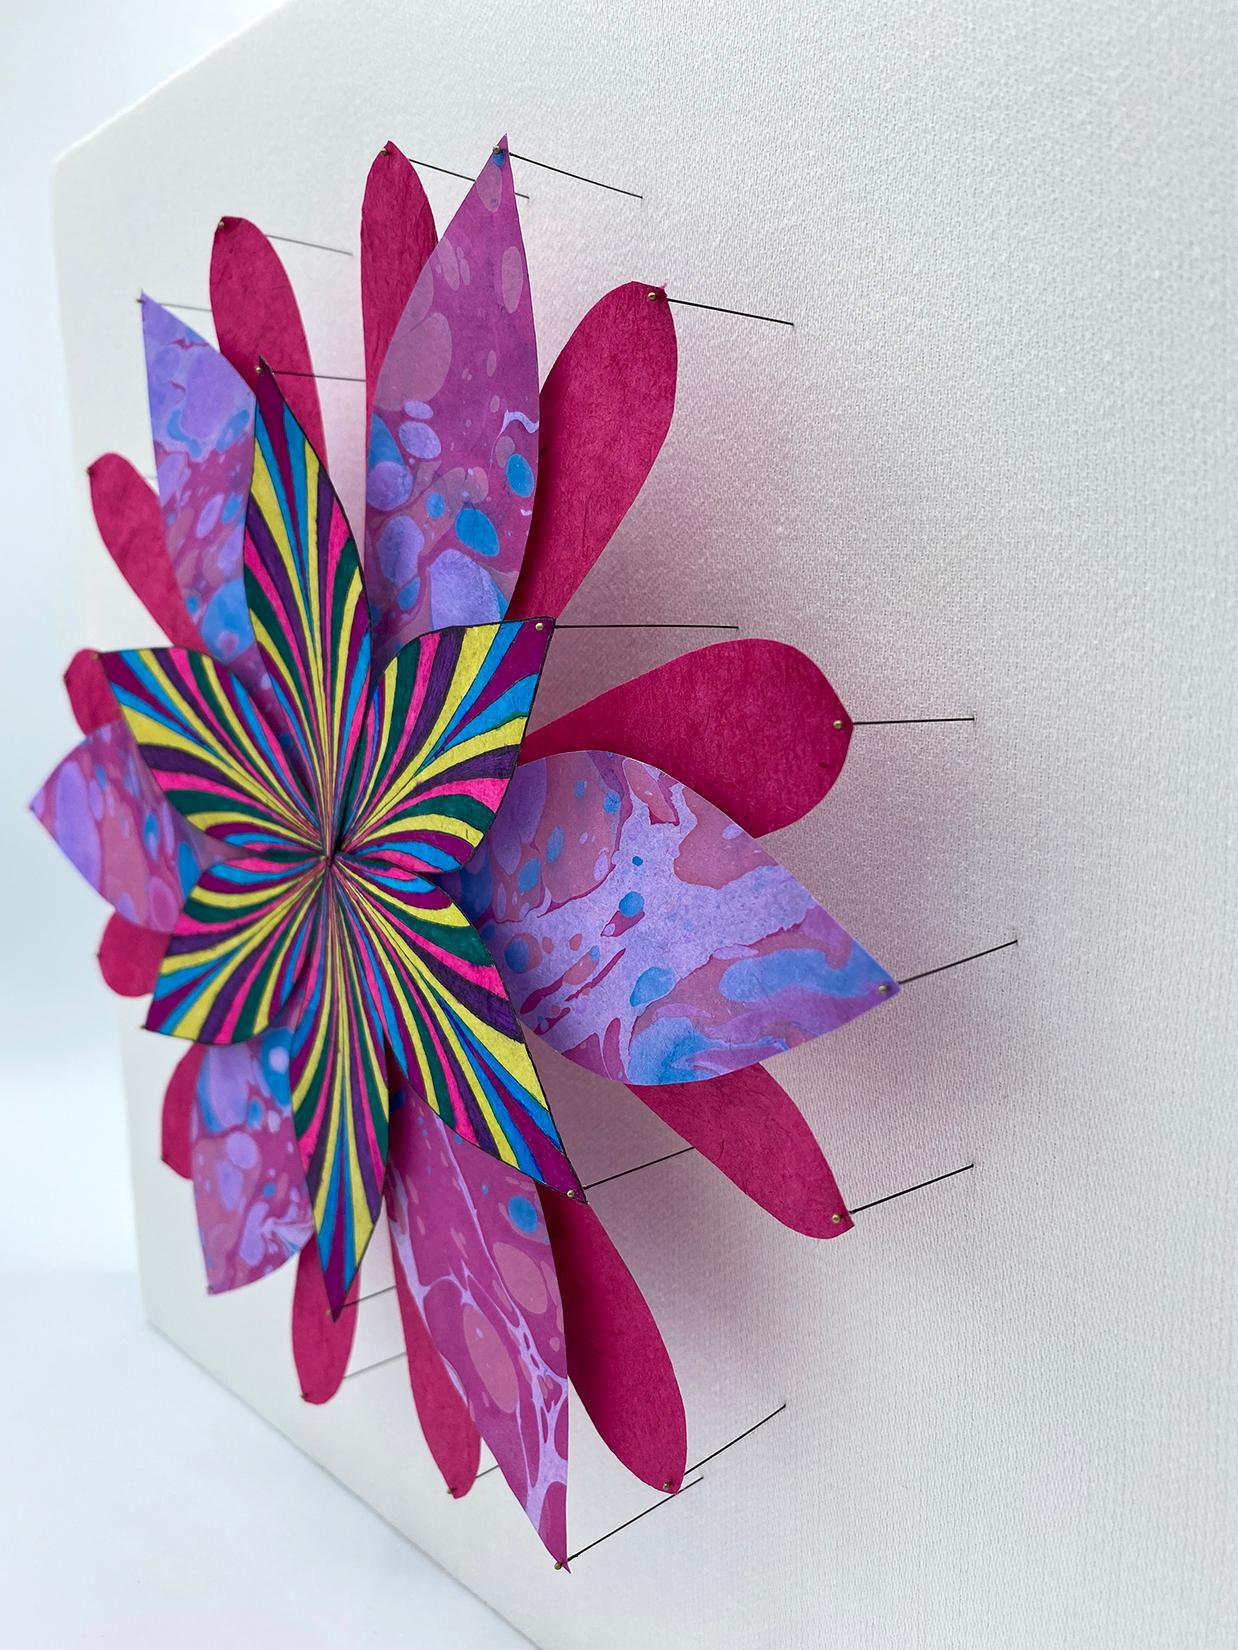 Triple Shooting Star Flower, Bright Botanical Wall Sculpture in Magenta, Purple - Contemporary Mixed Media Art by Jill Parisi